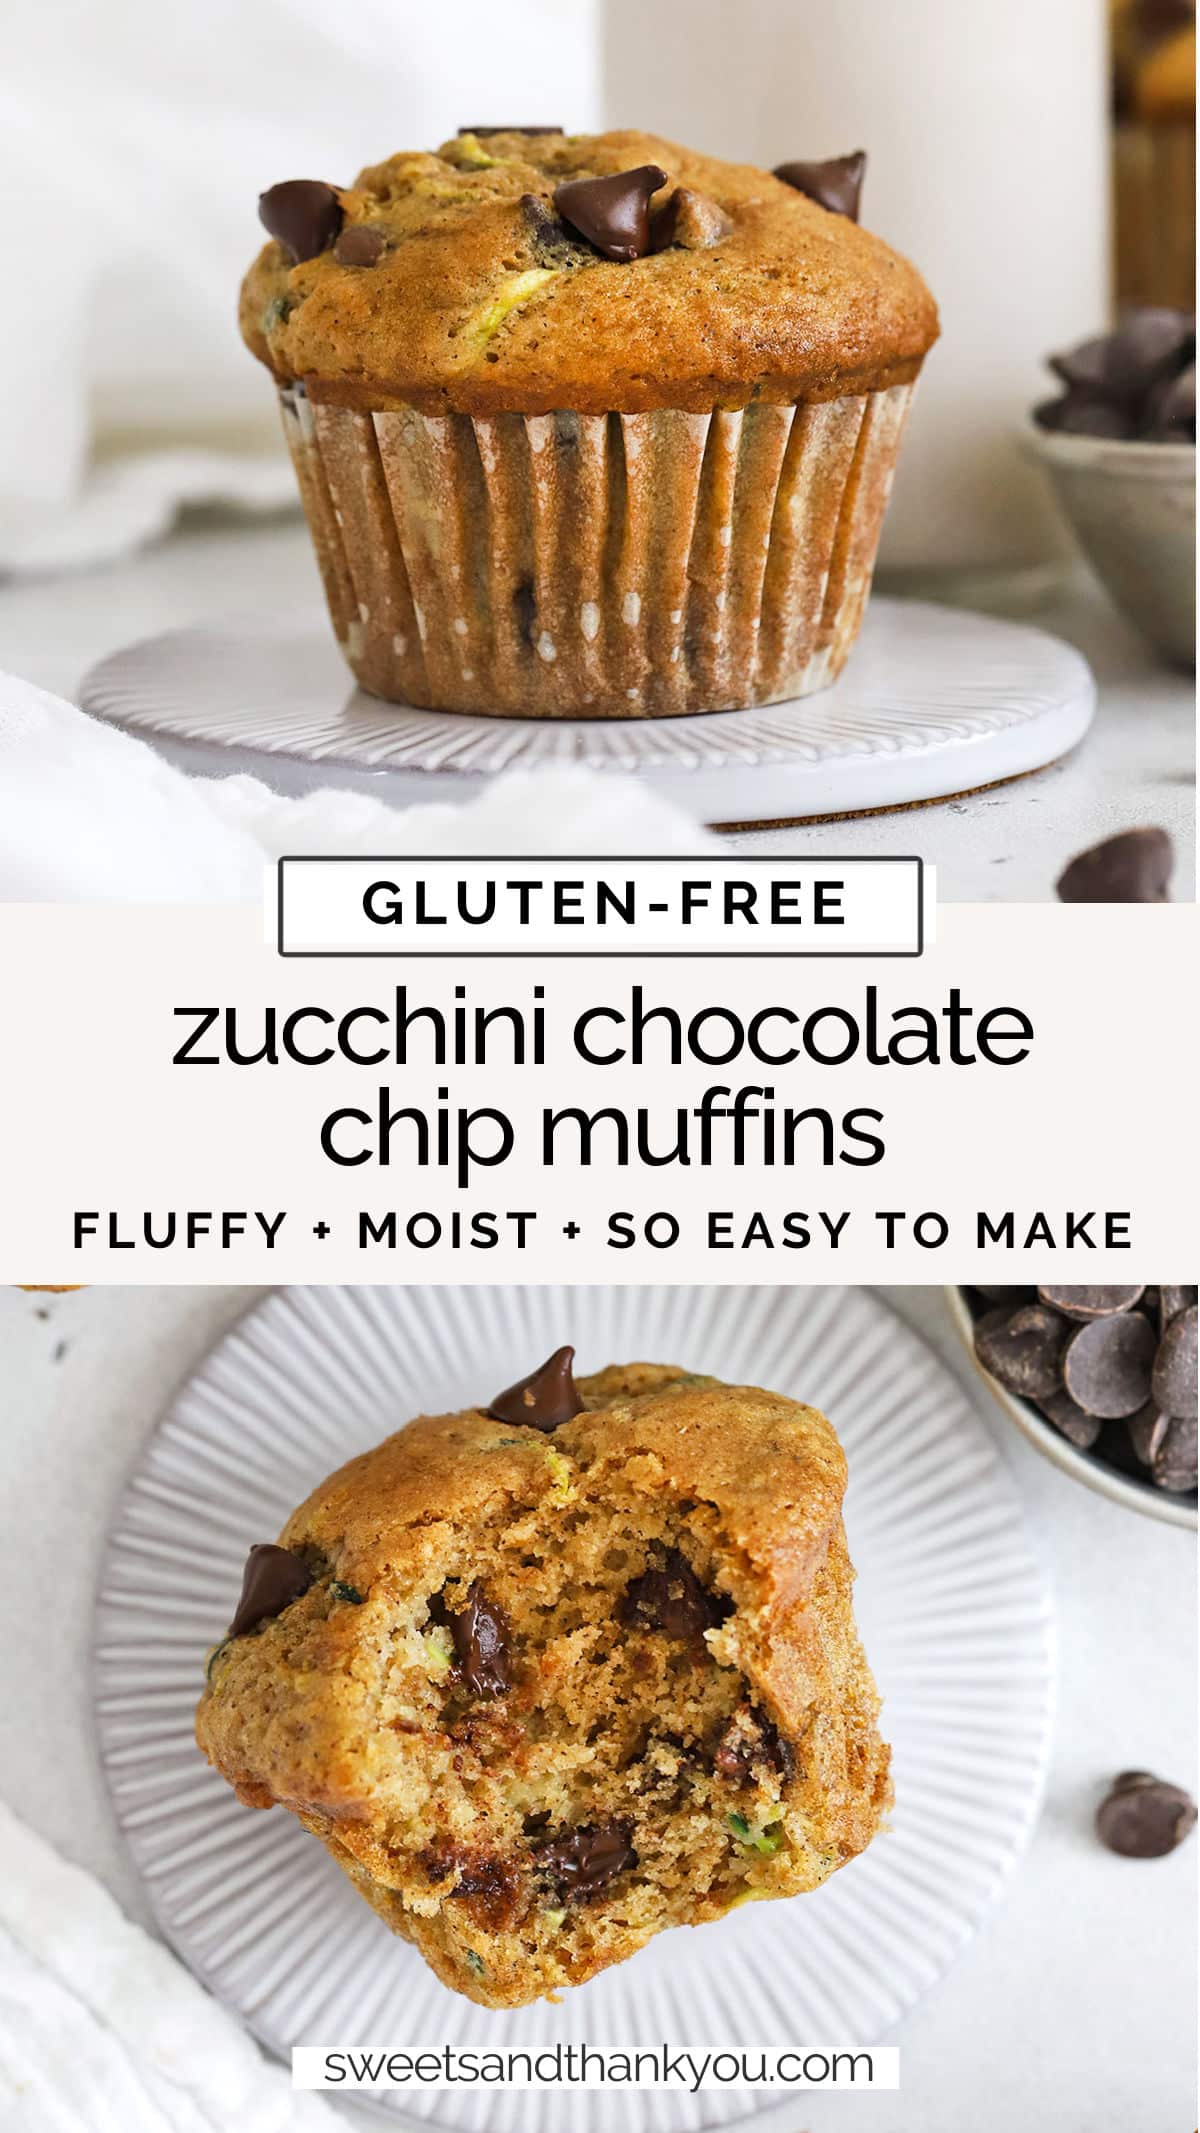 Gluten-Free Zucchini Chocolate Chip Muffins - These fluffy gluten-free zucchini muffins are loaded with chocolate chips & warm spices. The perfect way to use up that zucchini! // gluten-free zucchini muffin recipe // gluten-free zucchini bread muffins // gluten-free chocolate chip zucchini muffins recipe // brown butter zucchini muffins // moist gluten-free zucchini muffins // easy gluten-free zucchini muffins // fluffy gluten-free zucchini muffins // chocolate chip zucchini muffin